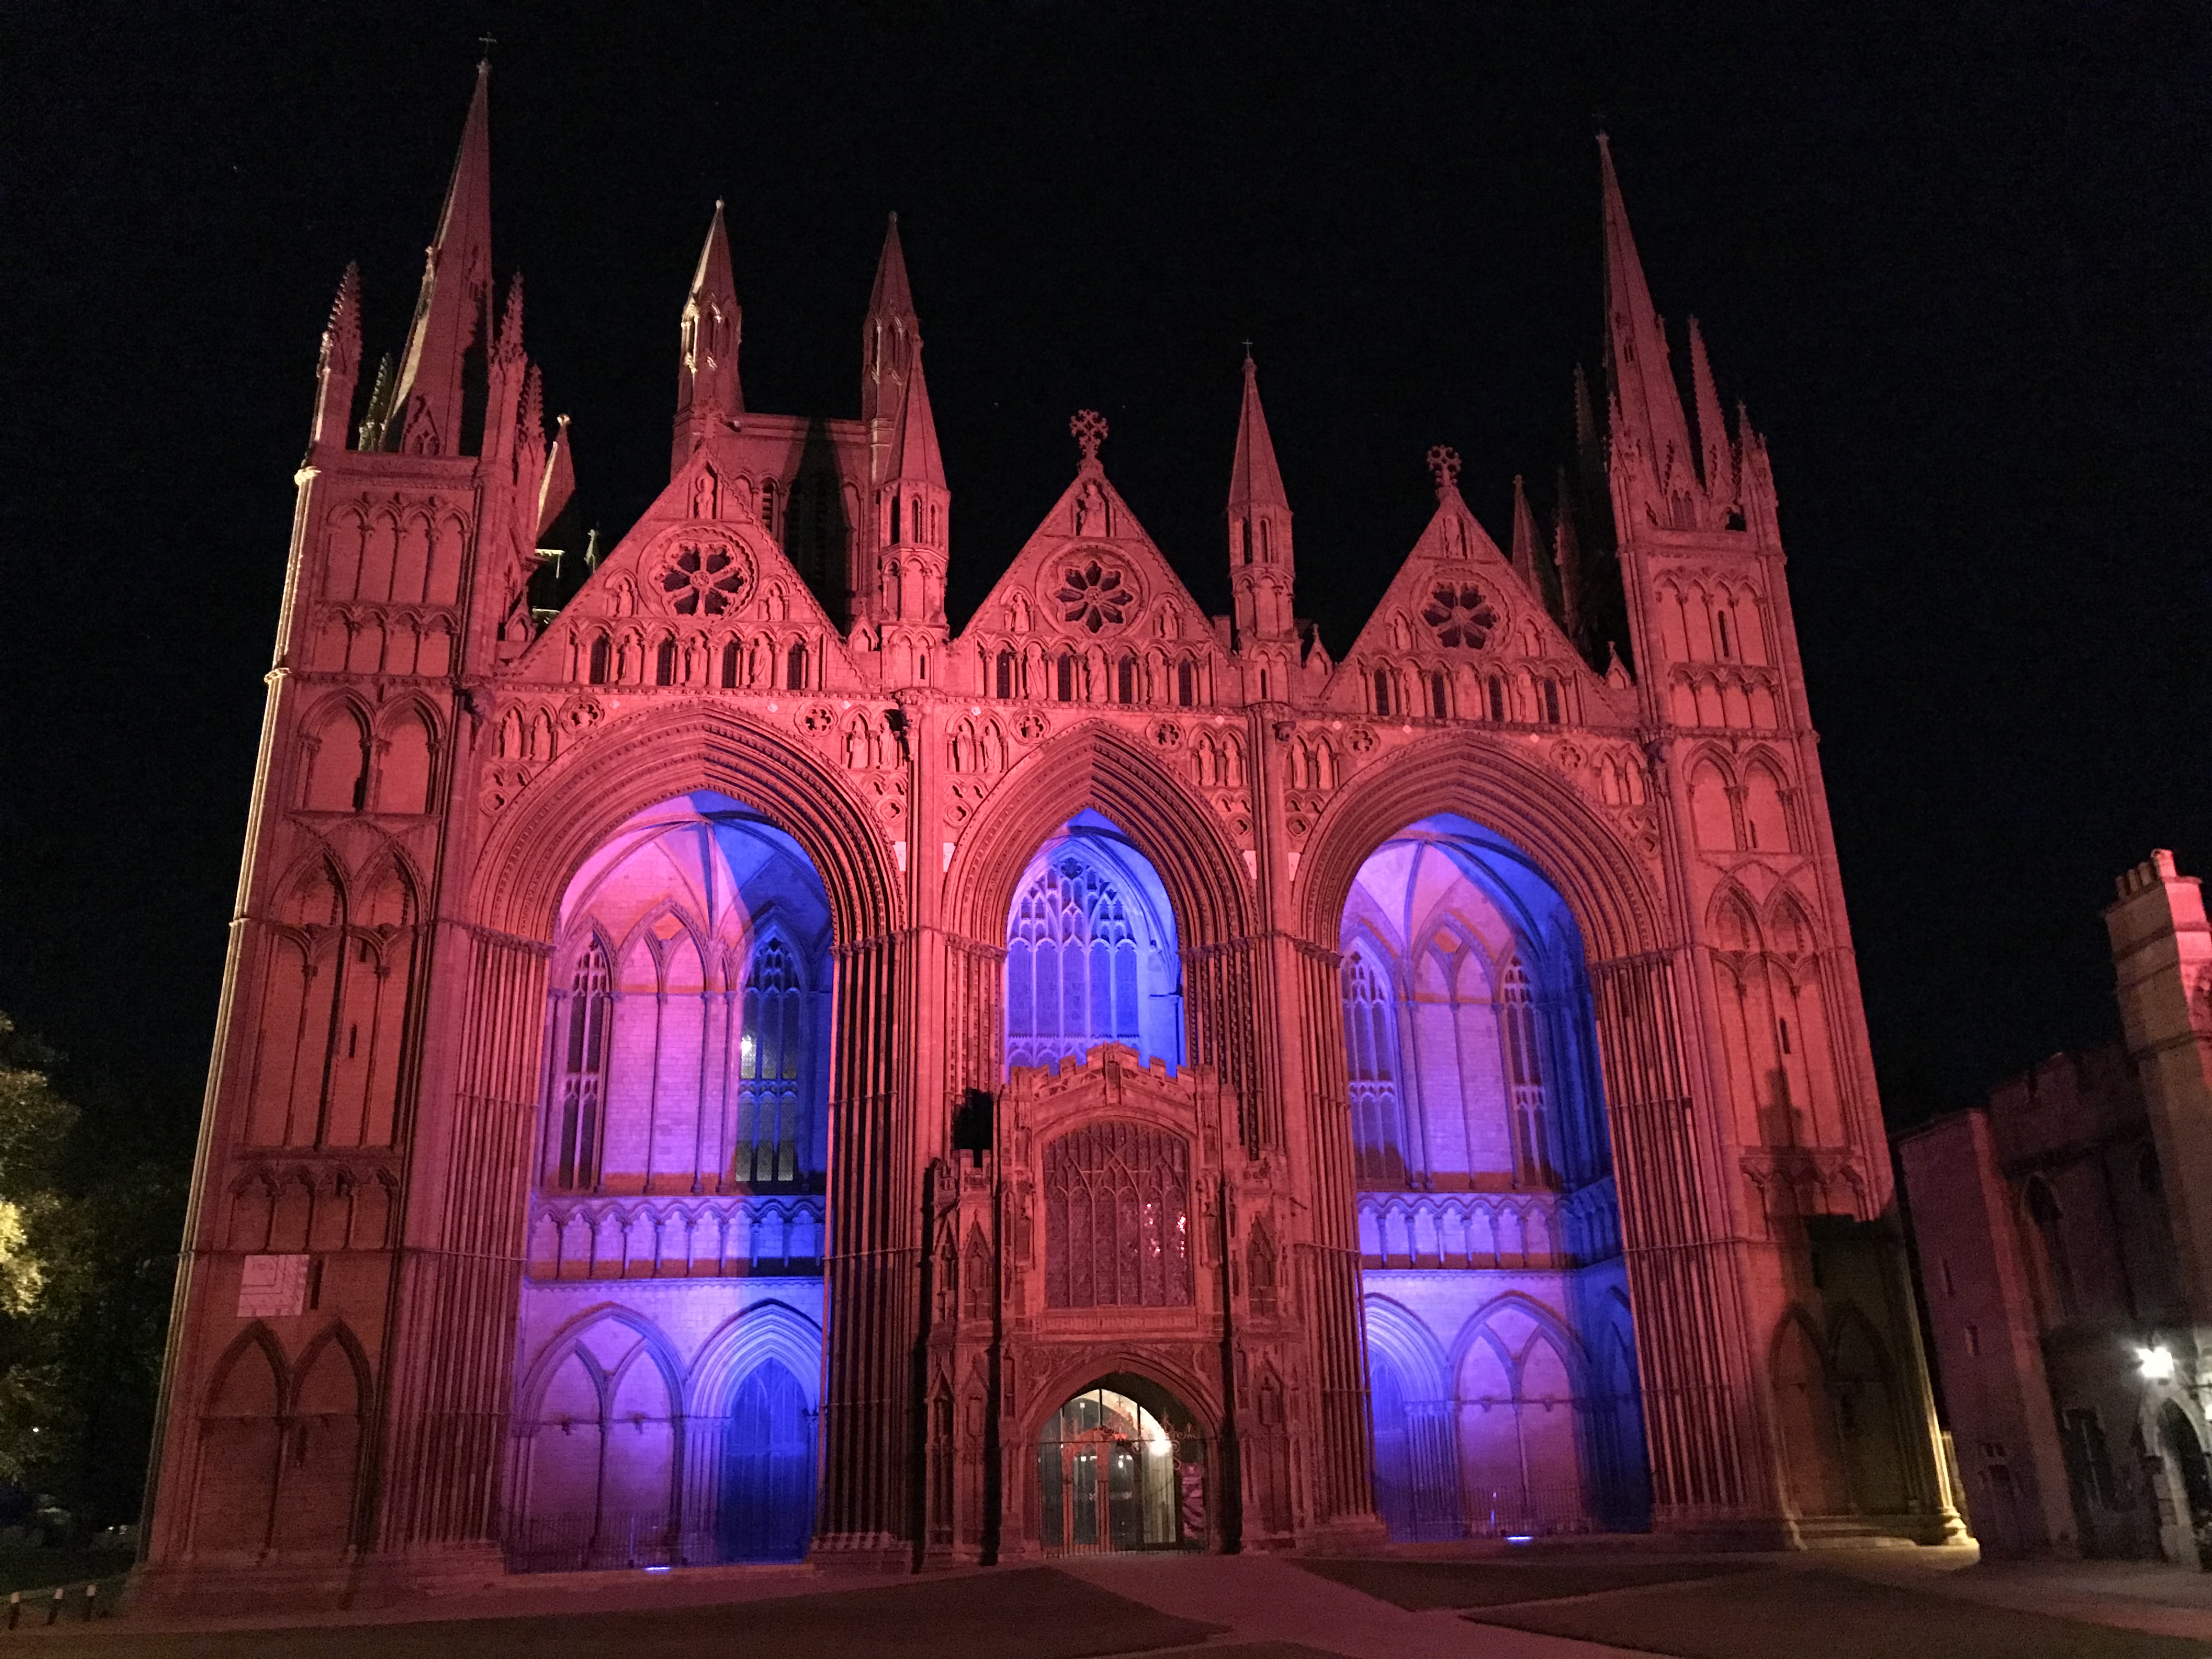 The Cathedral west front lit with pink and blue floodlights